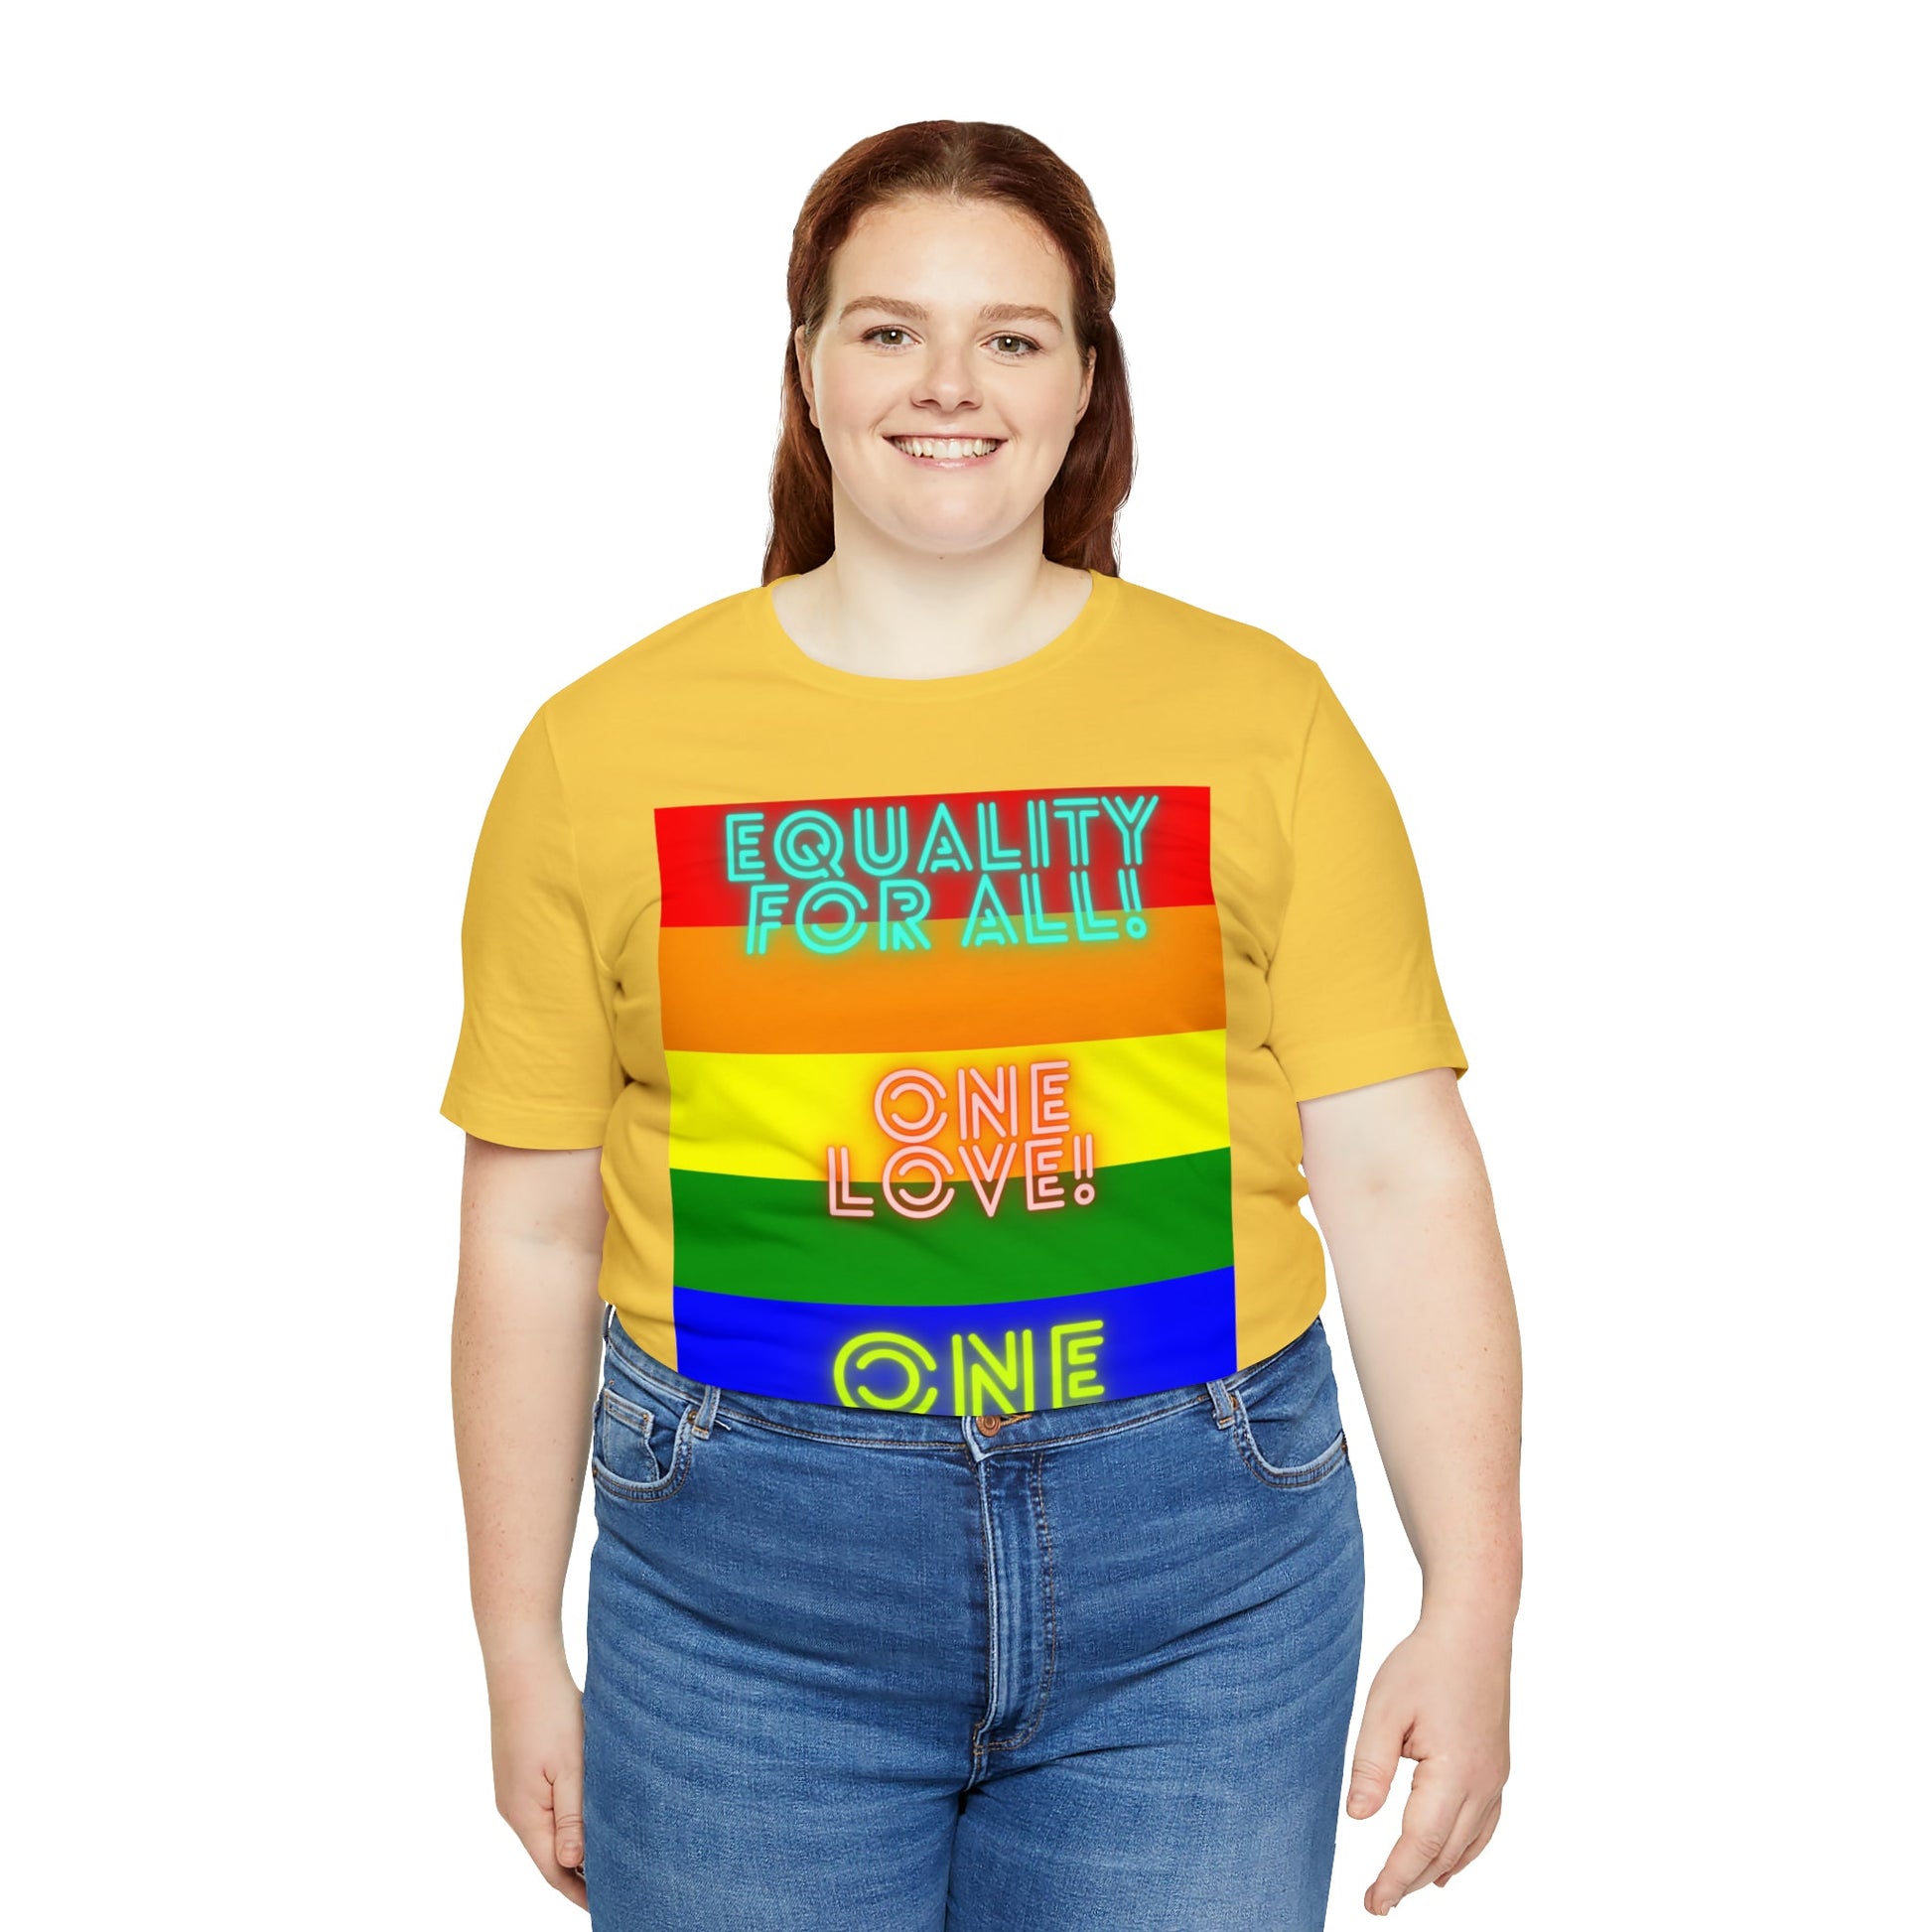 Equality for all, one love, one pride. Unisex Jersey Short Sleeve Tee-Shalav5